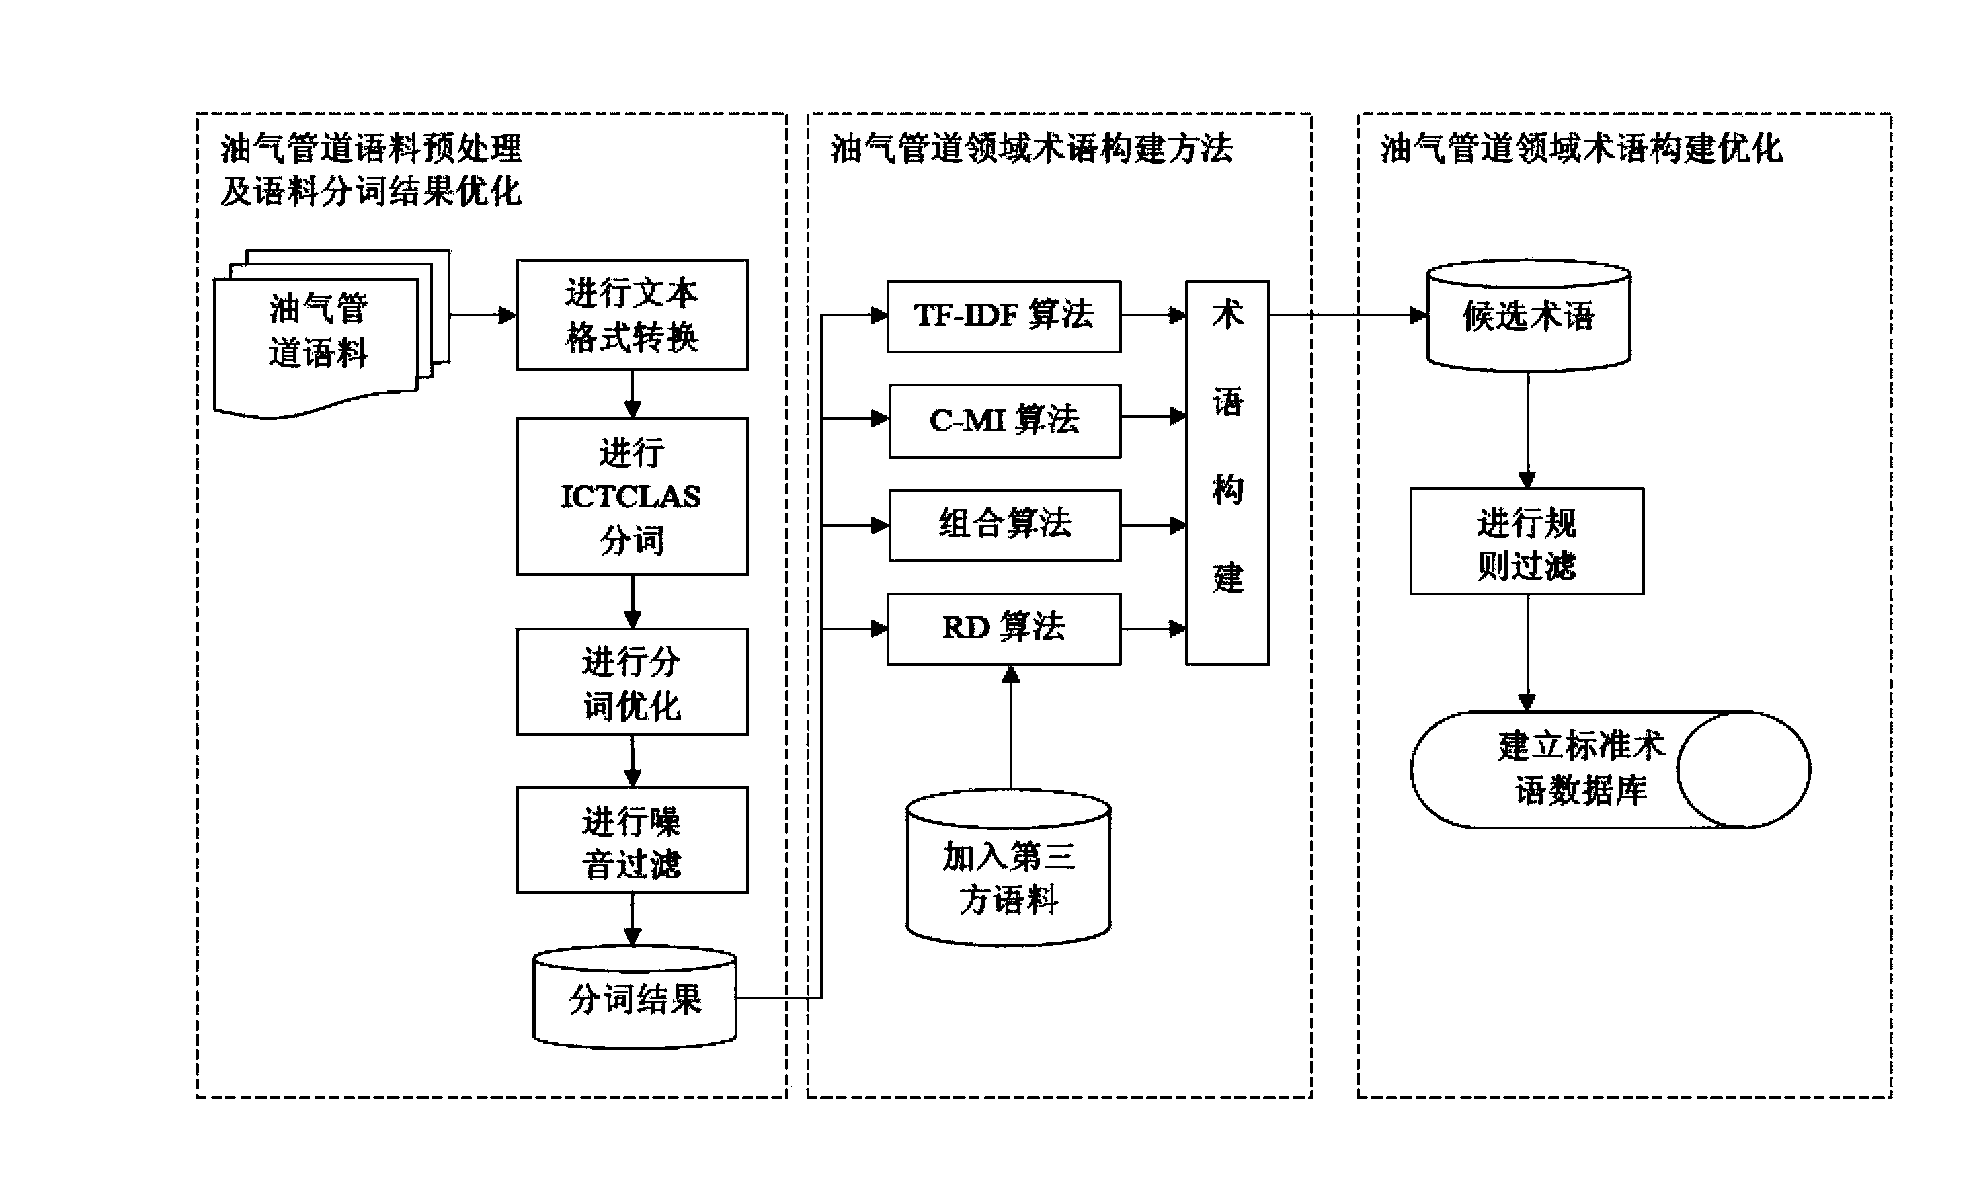 Multi-strategy integration standard terminology processing method for oil and gas pipeline field